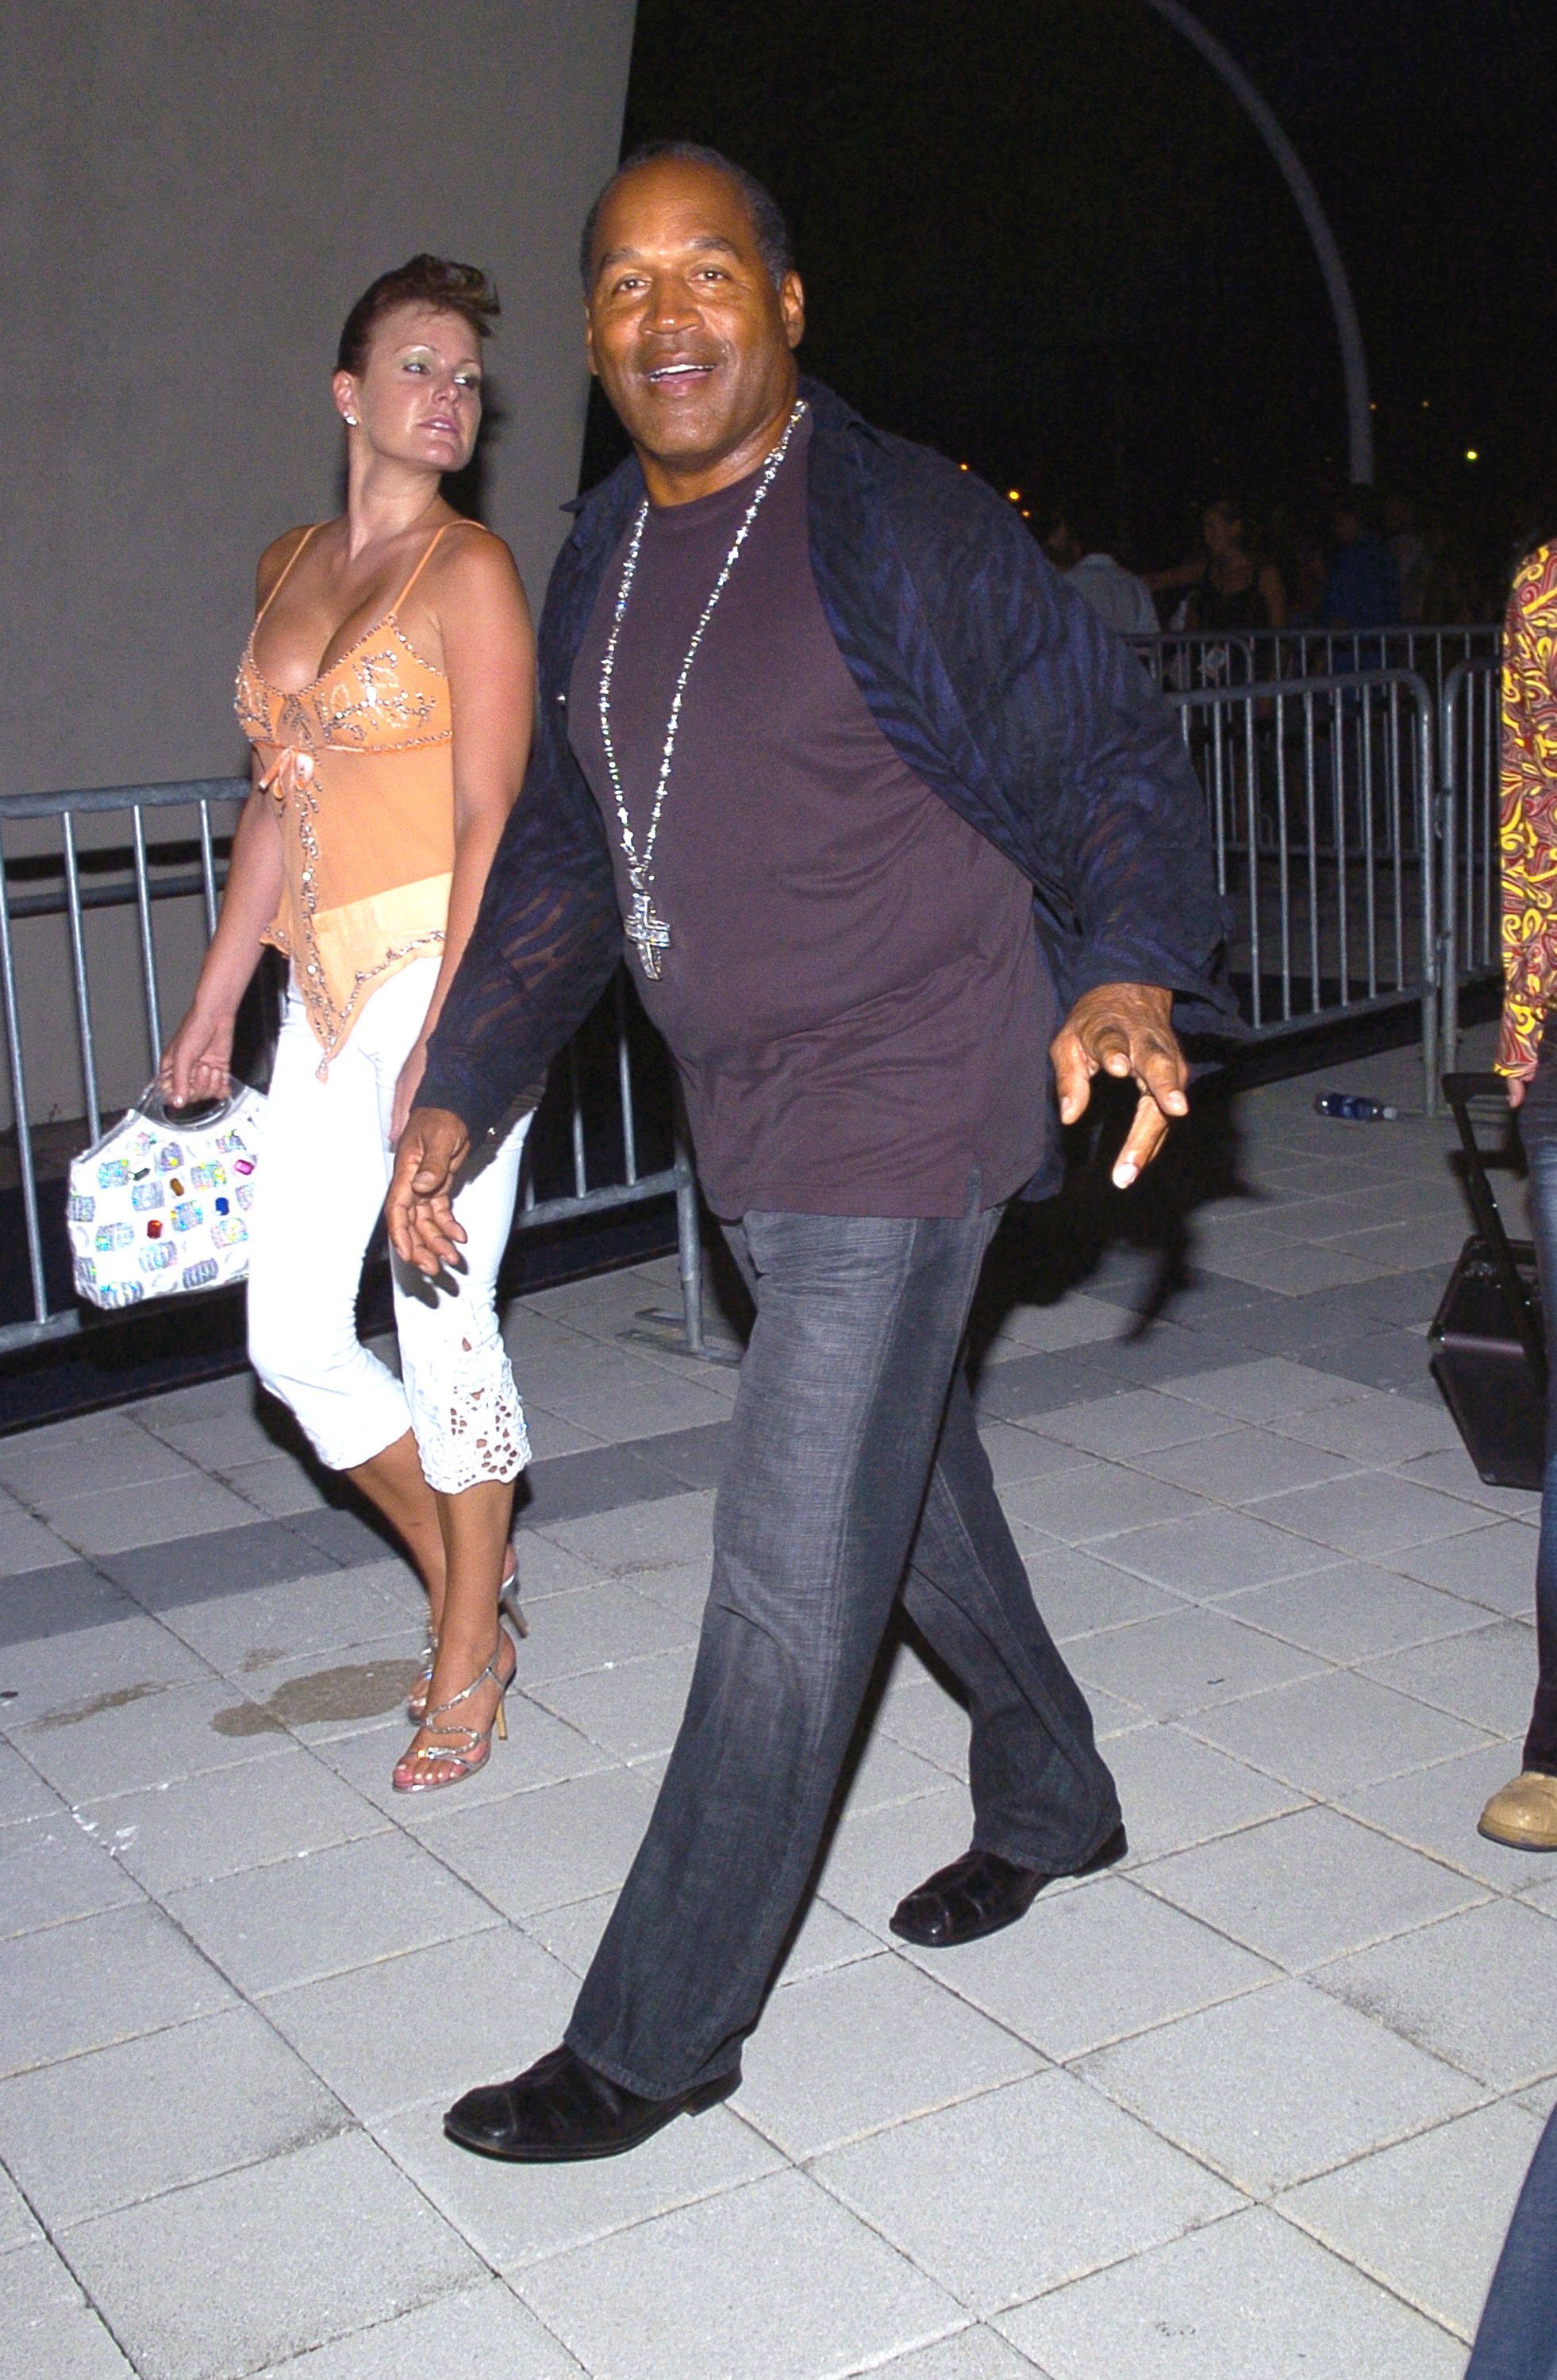 OJ Simpson arriving at MTV's VMA's in 2005. | Photo: Getty Images